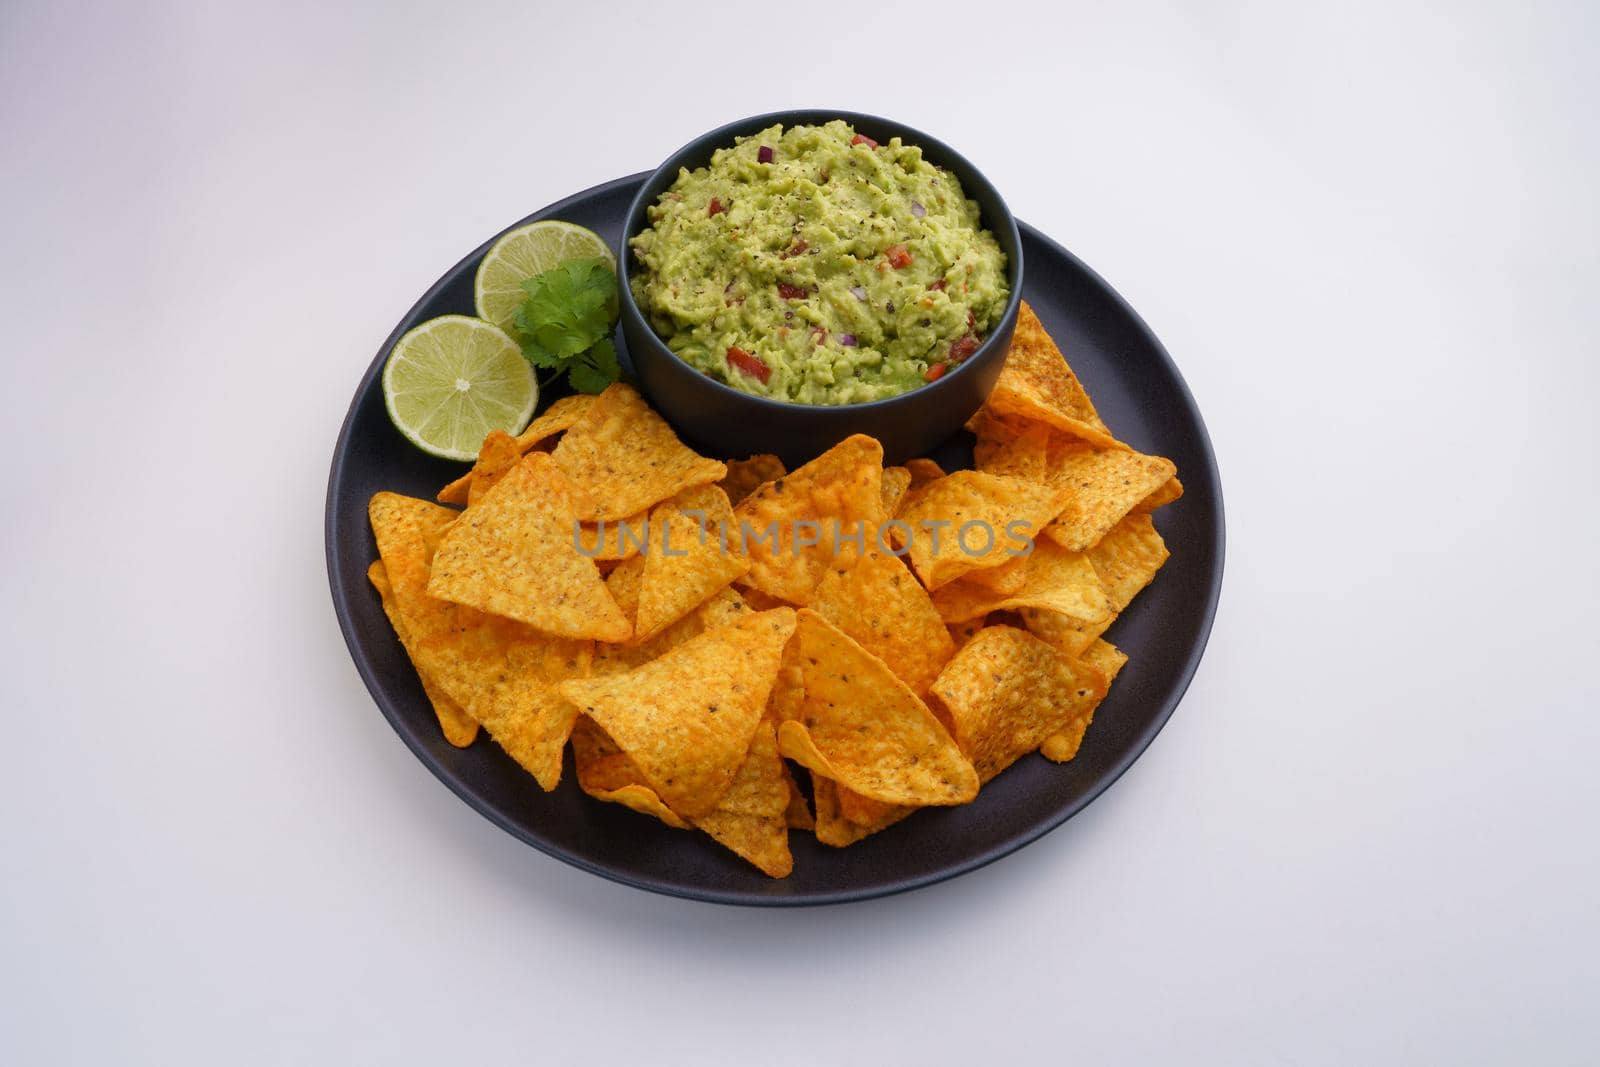 Top view of black plate of guacamole sauce or dip and tortilla chips or nachos isolated on a white background by DariaKulkova